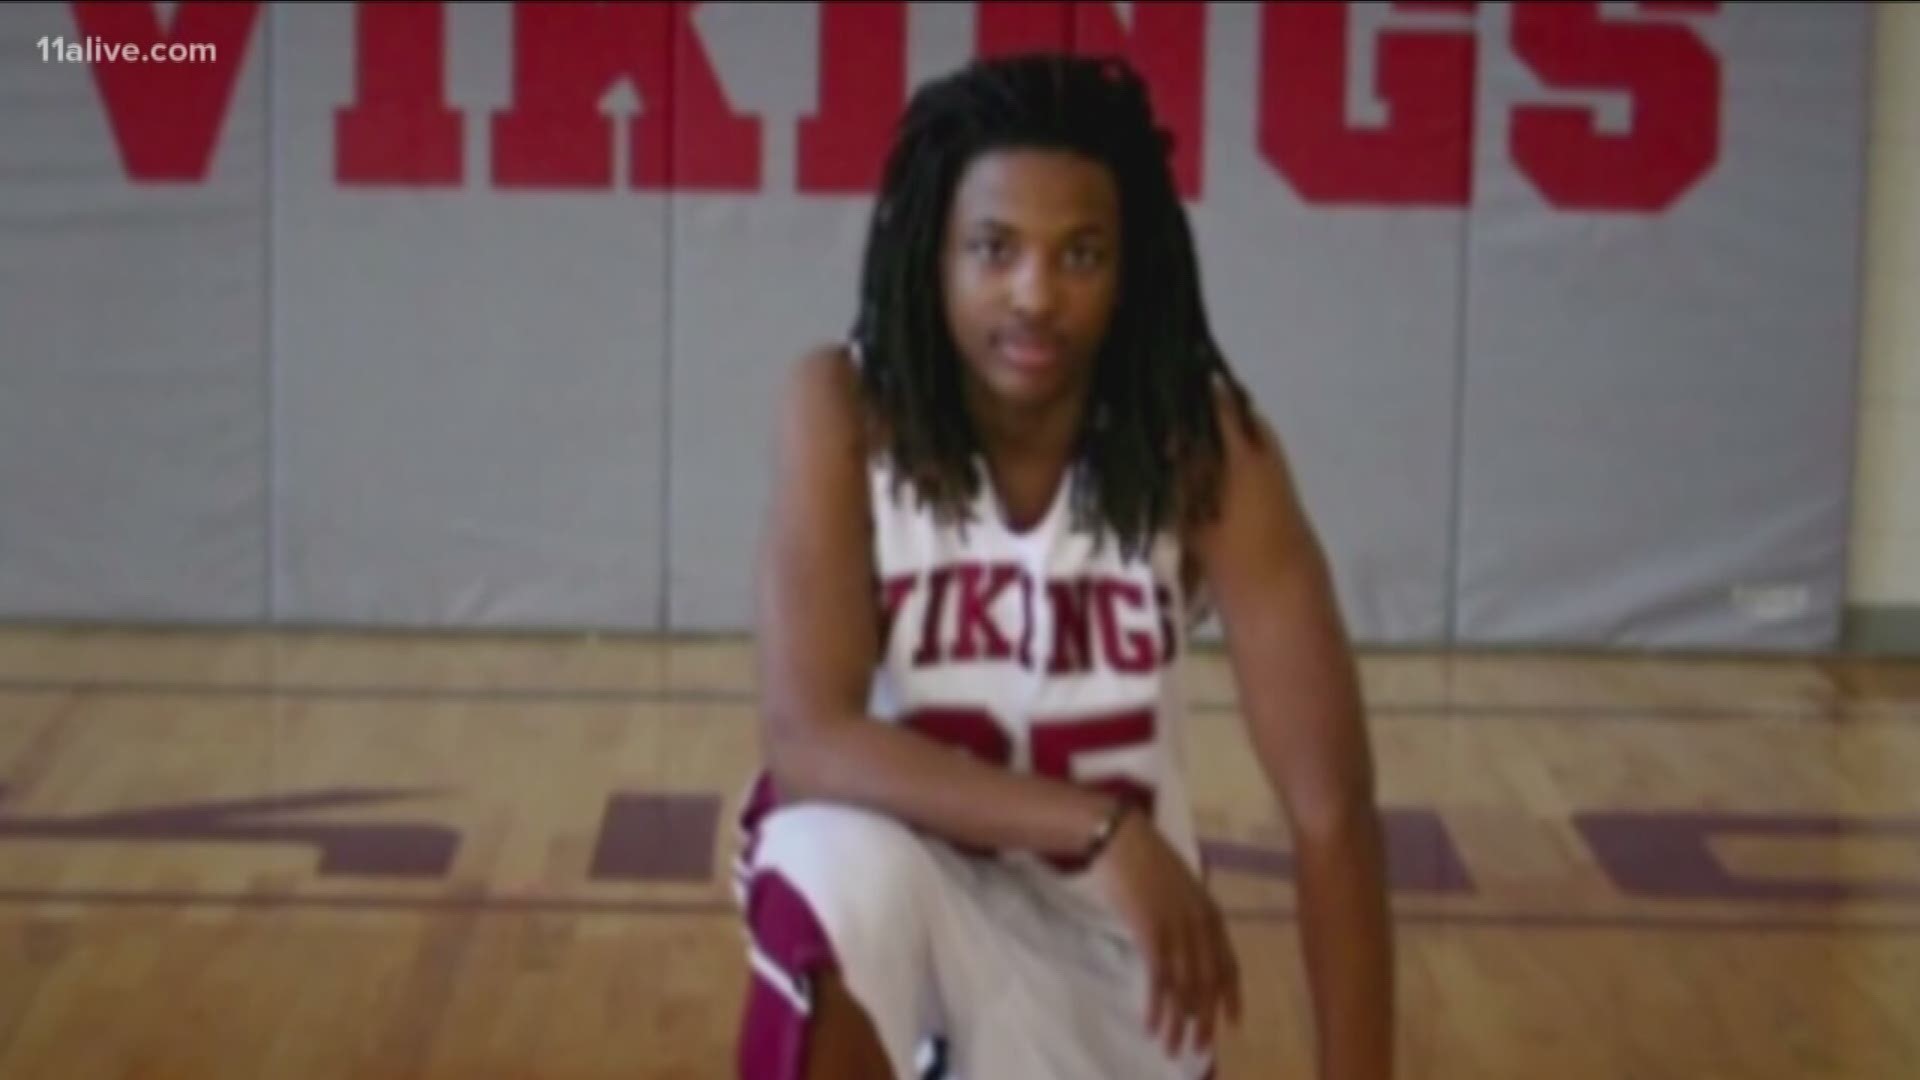 The teen was found dead in a rolled-up gym mat at a south Georgia high school in 2013.